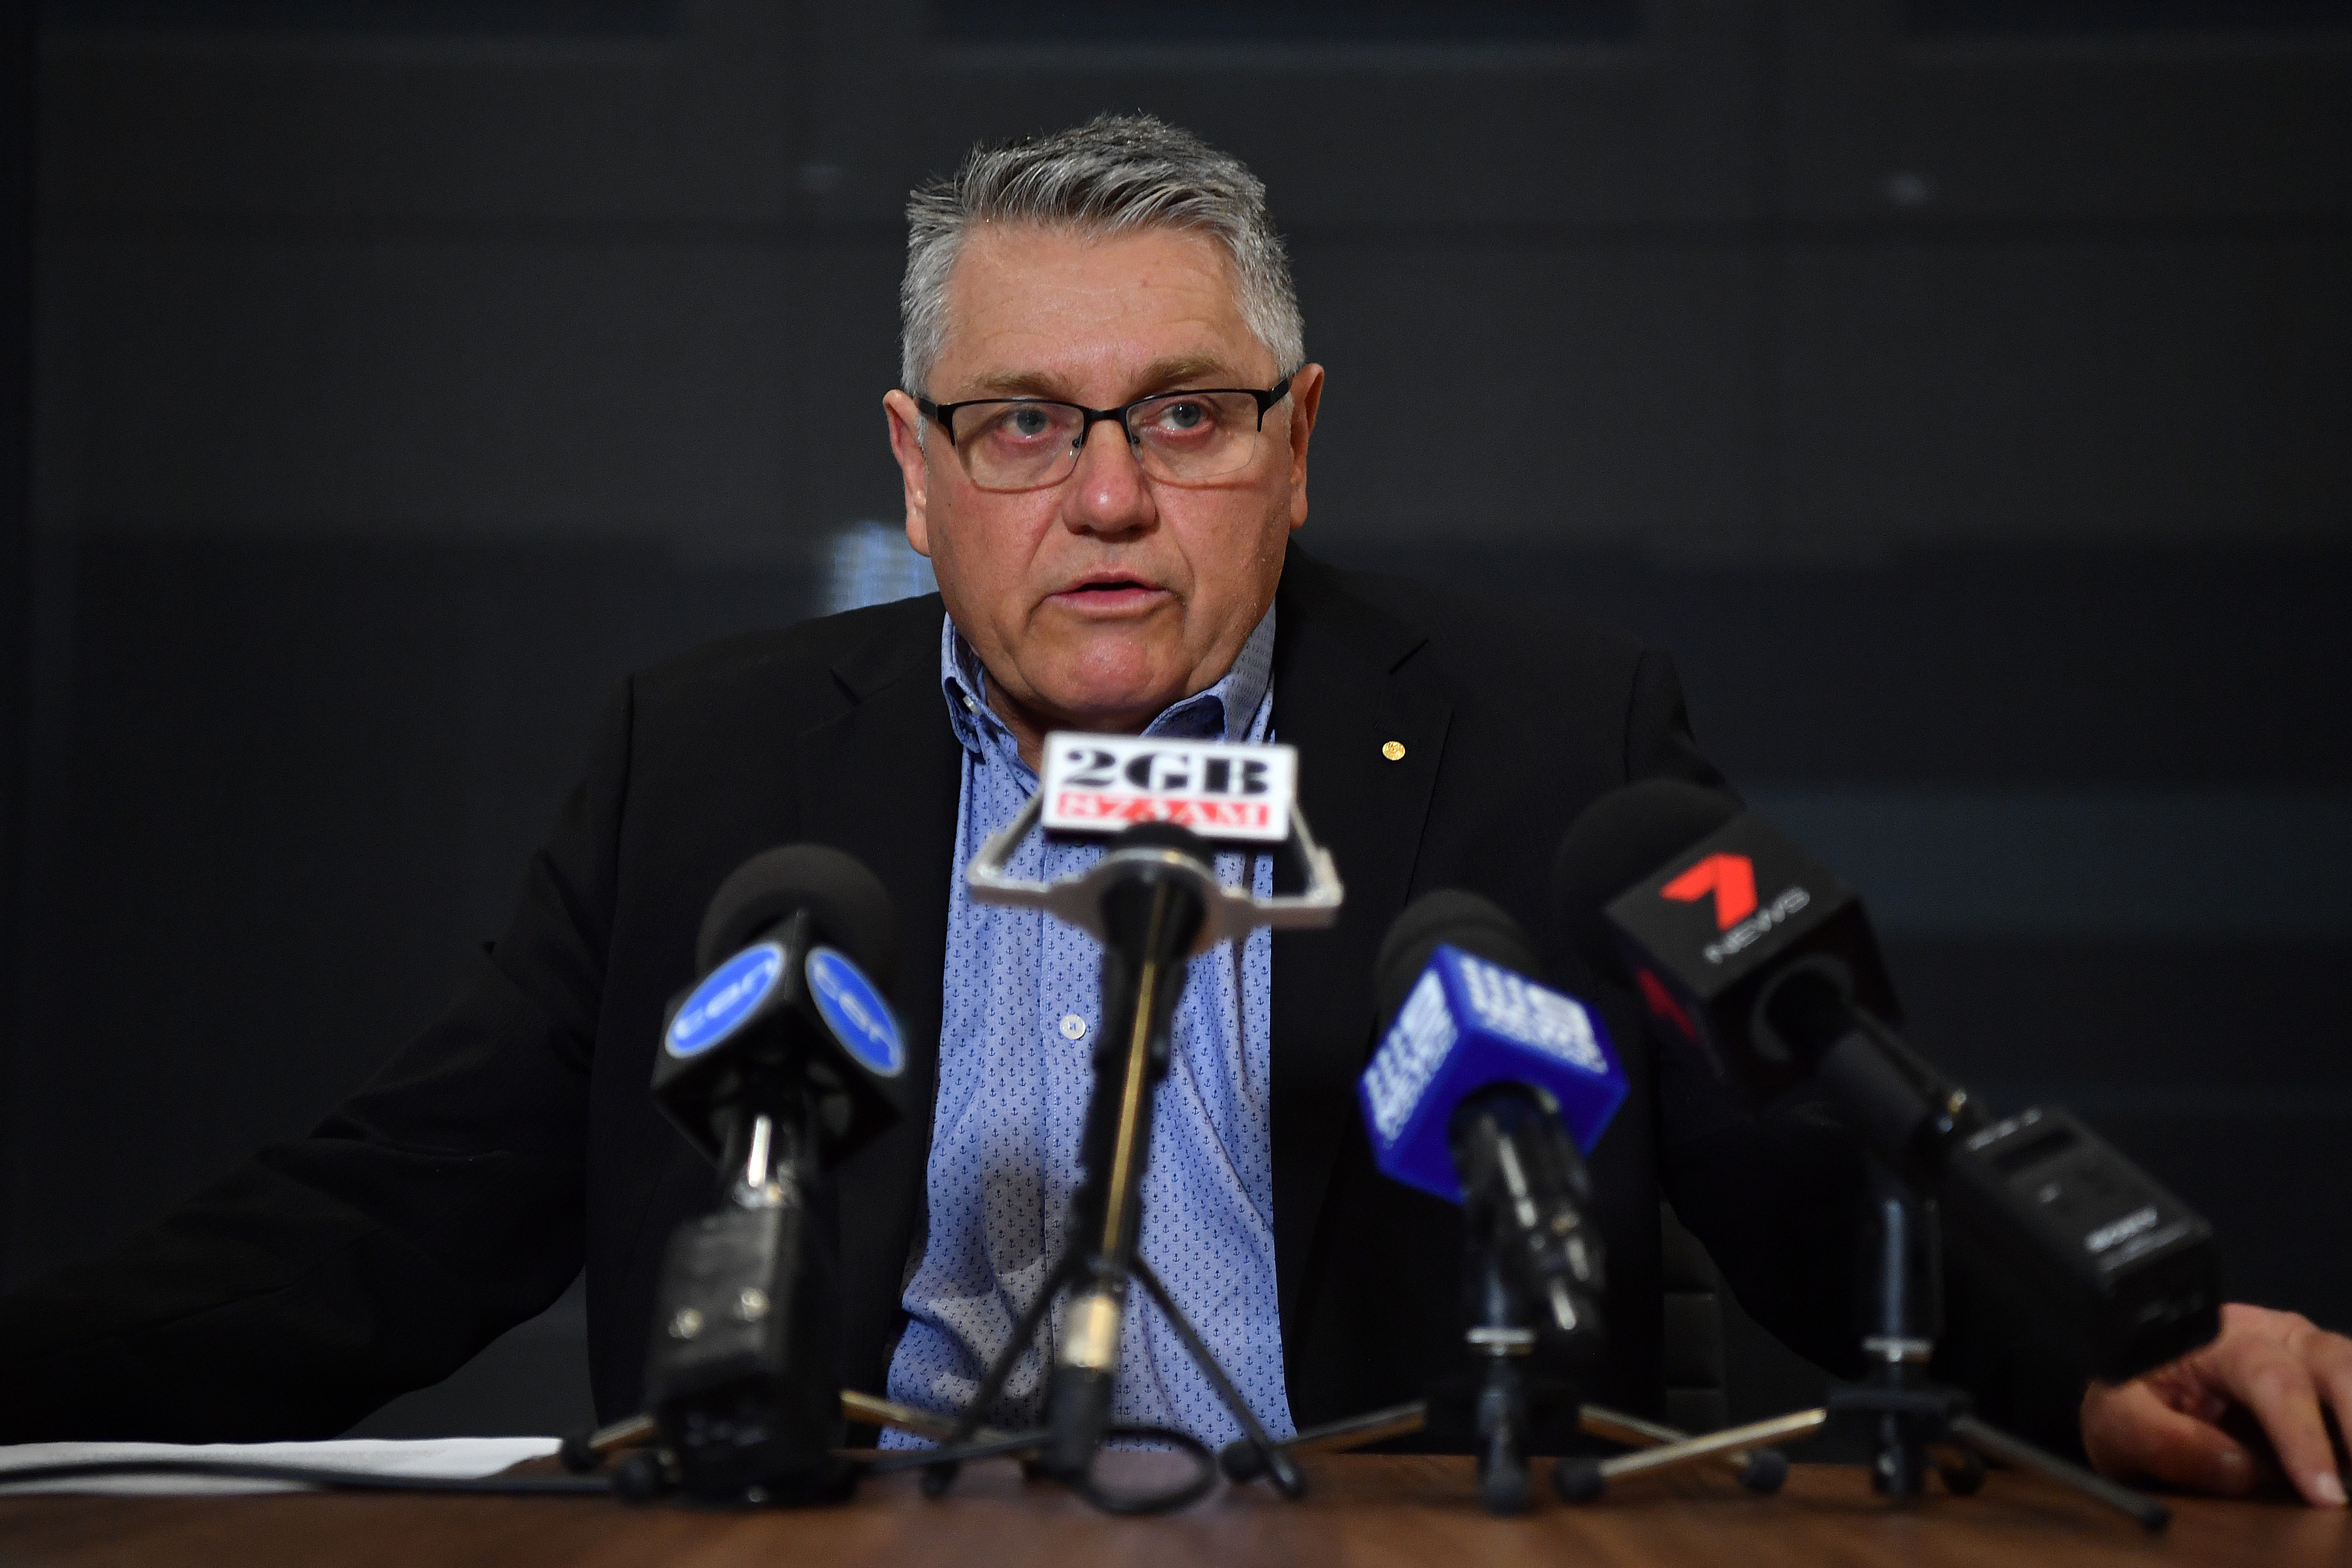 Ray Hadley Responds To Arrest Of Son, Daniel Hadley, After Cocaine Charges